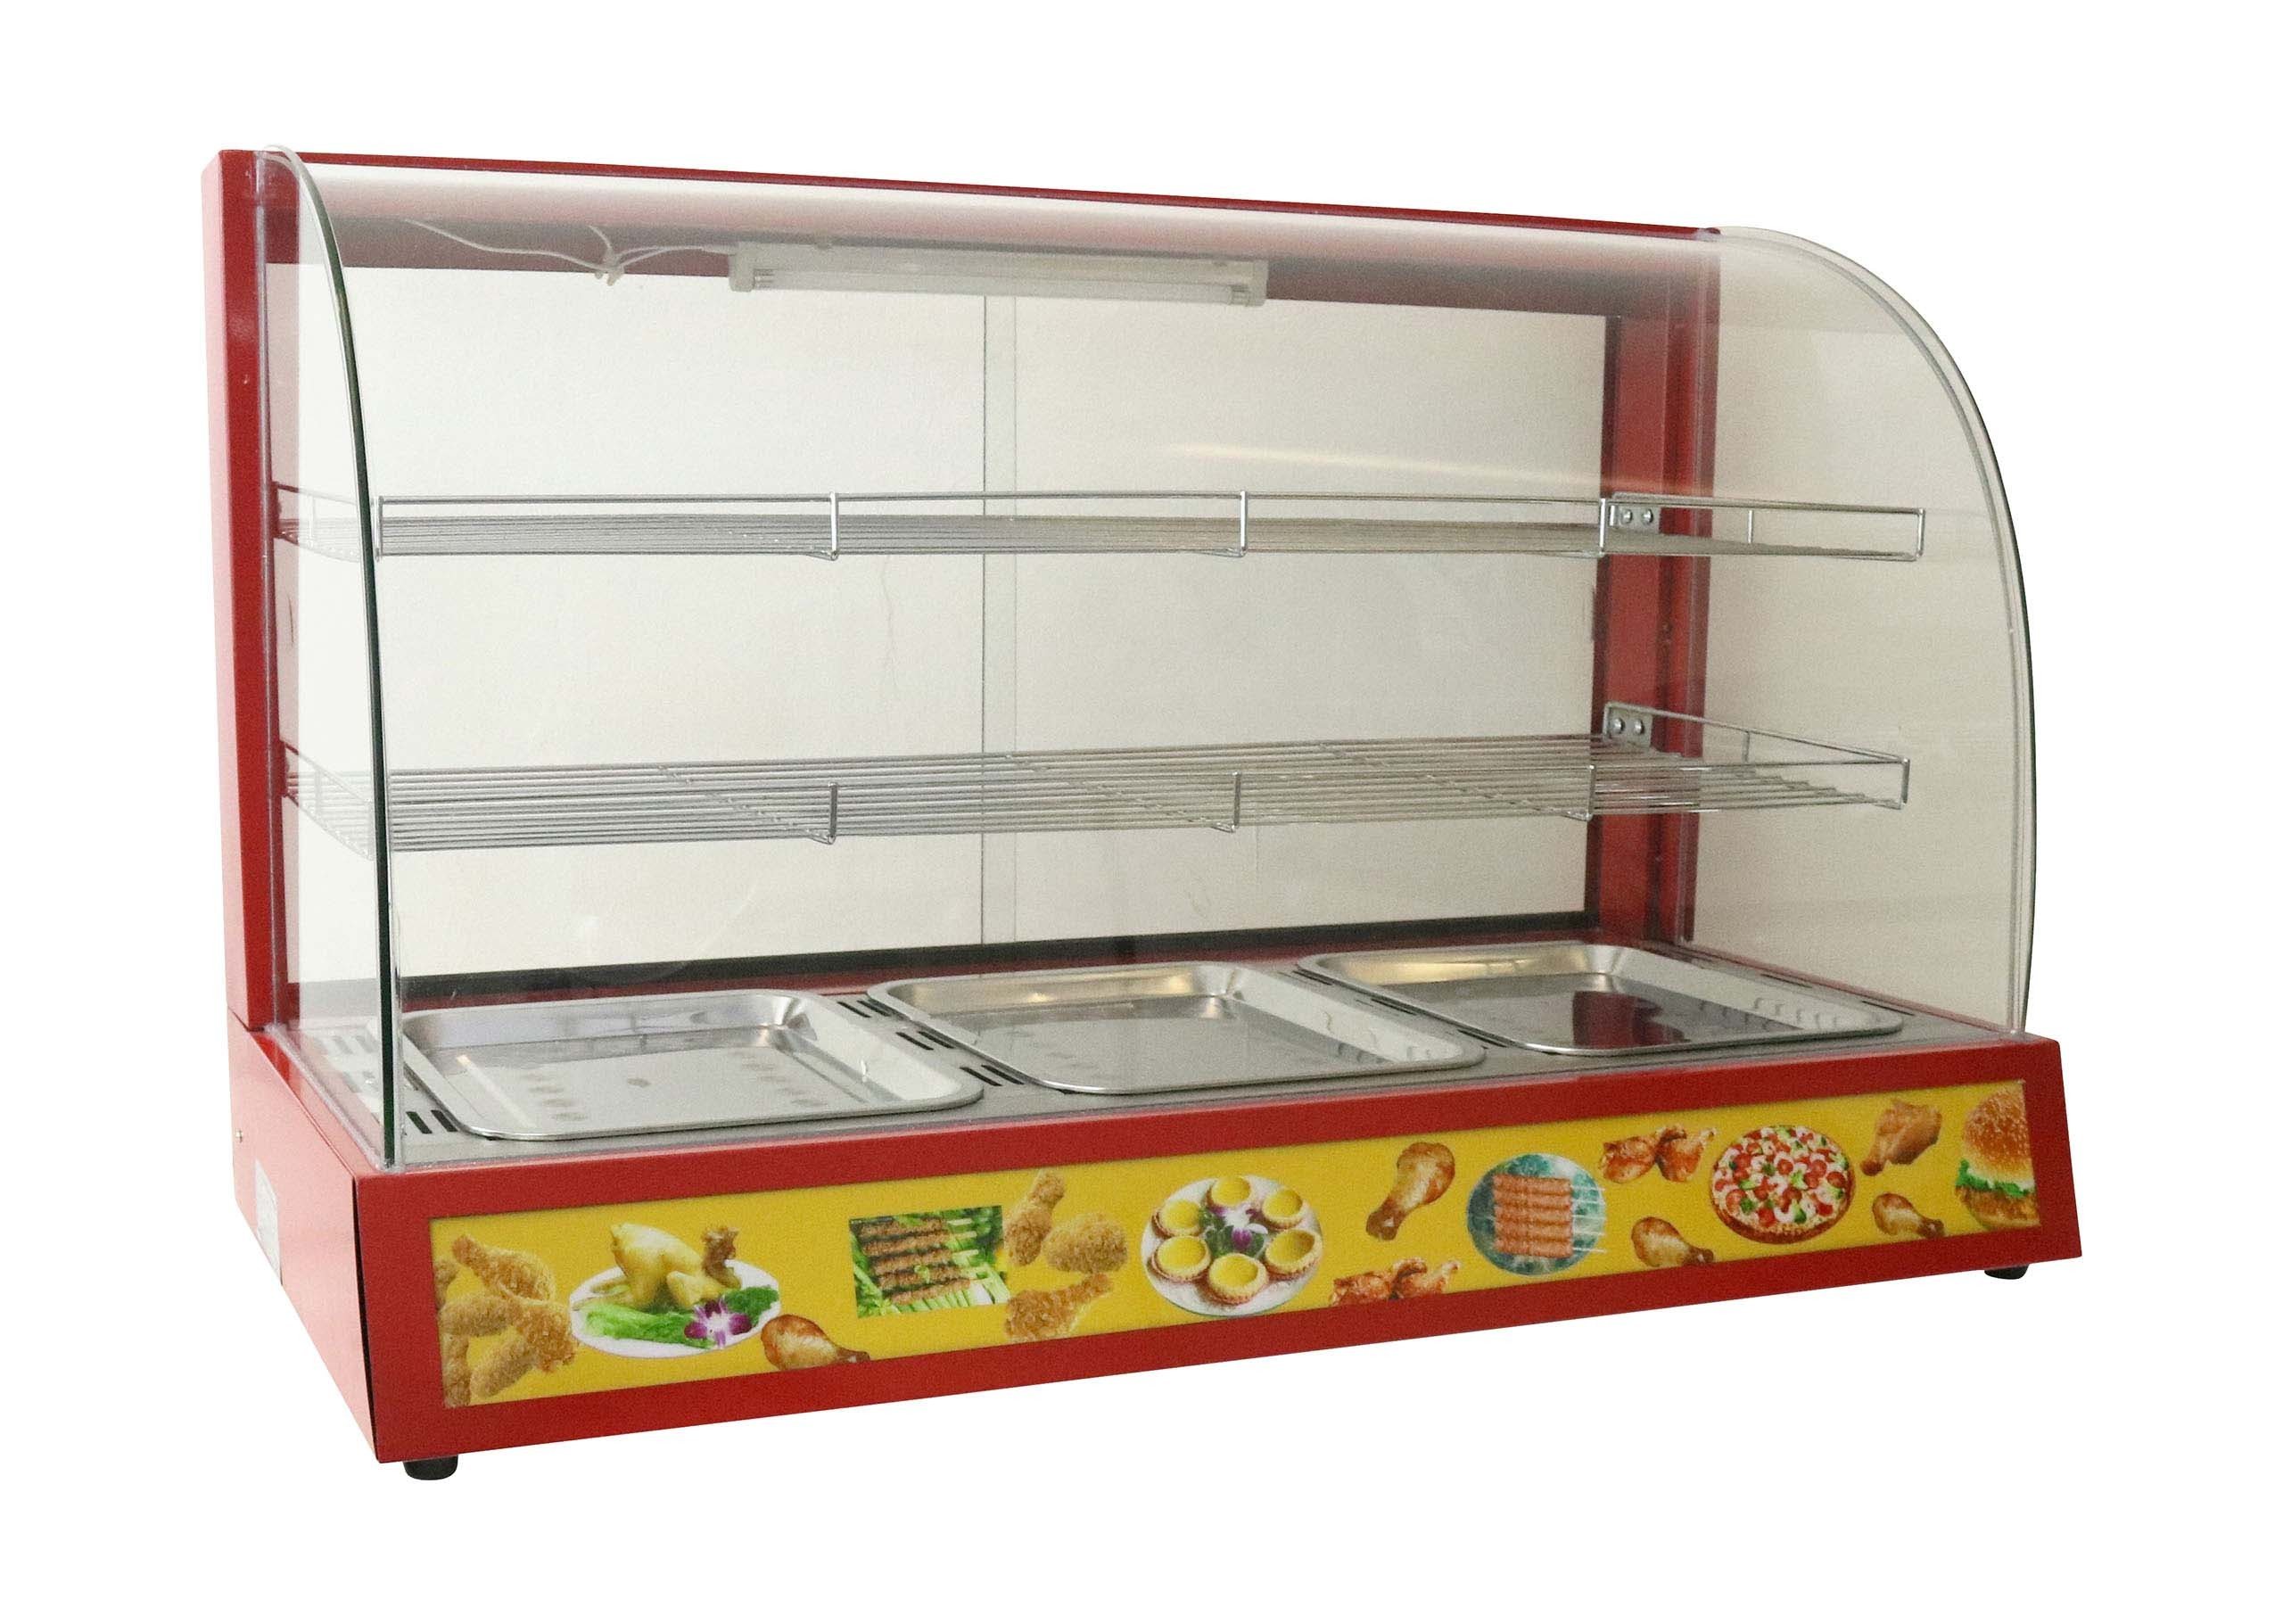 Modena Cdg10 Modena Cdg10 Pie Warmer Hot Food Display Cabinet intended for size 2560 X 1821